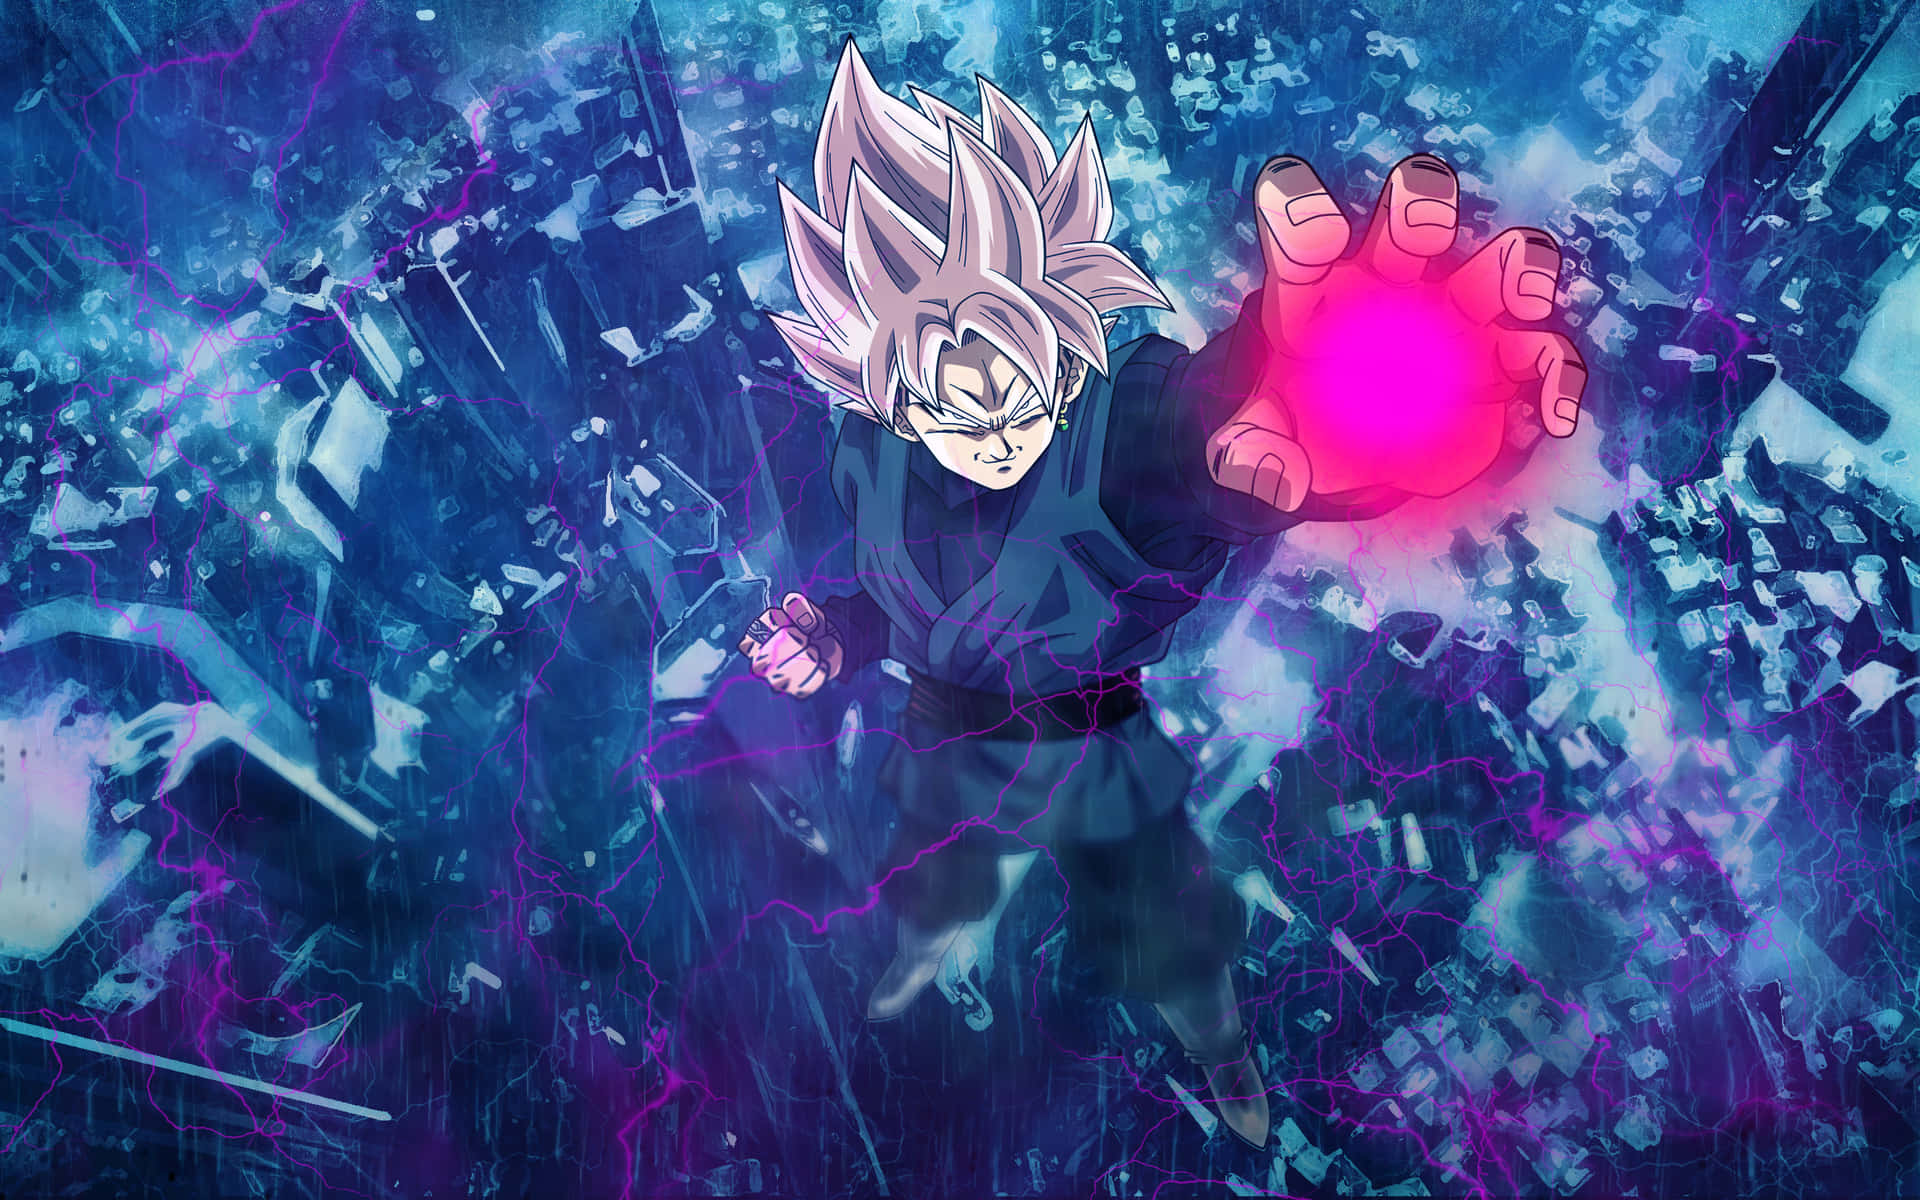 Almighty Goku Black in fearless action